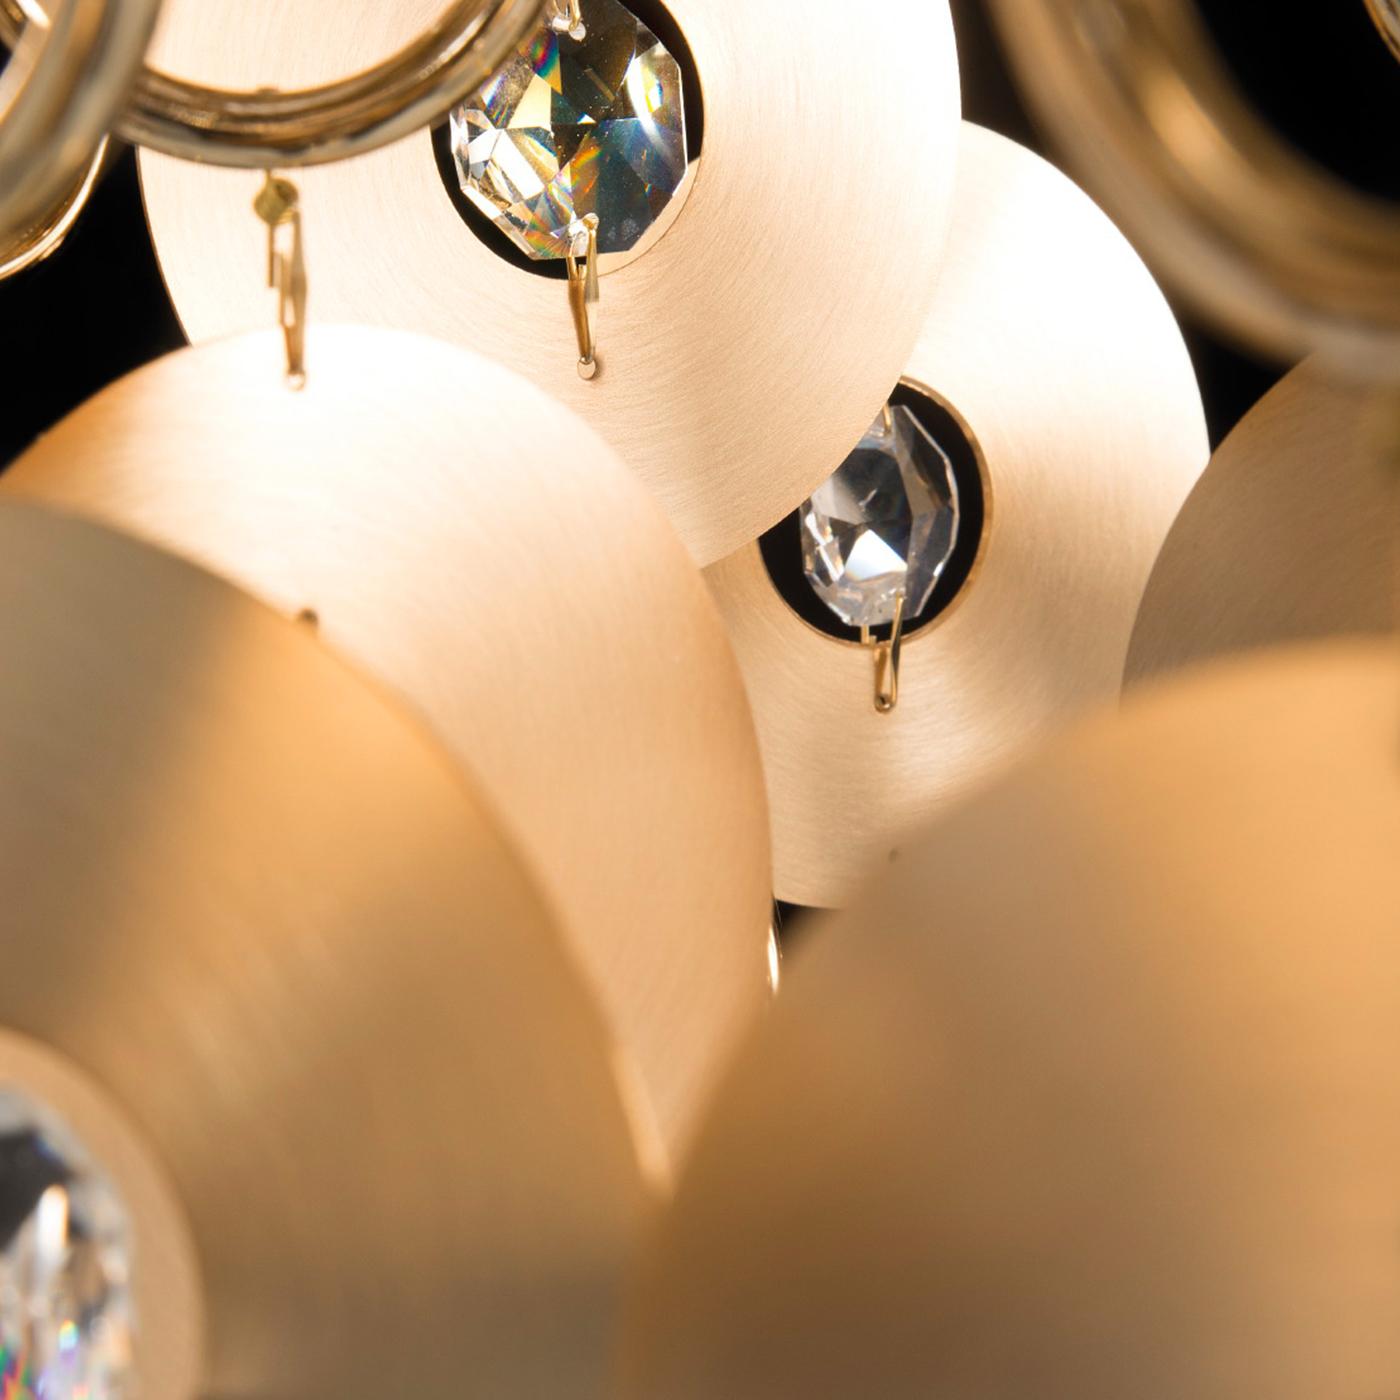 Satin-finished brass disks enclosing a royal-cut crystal and brass rings dangle from the center of this stylish pendant lamp, creating a pyramid that catches the light and creates a sparkling effect. A double-lined black fabric drum shade adds a